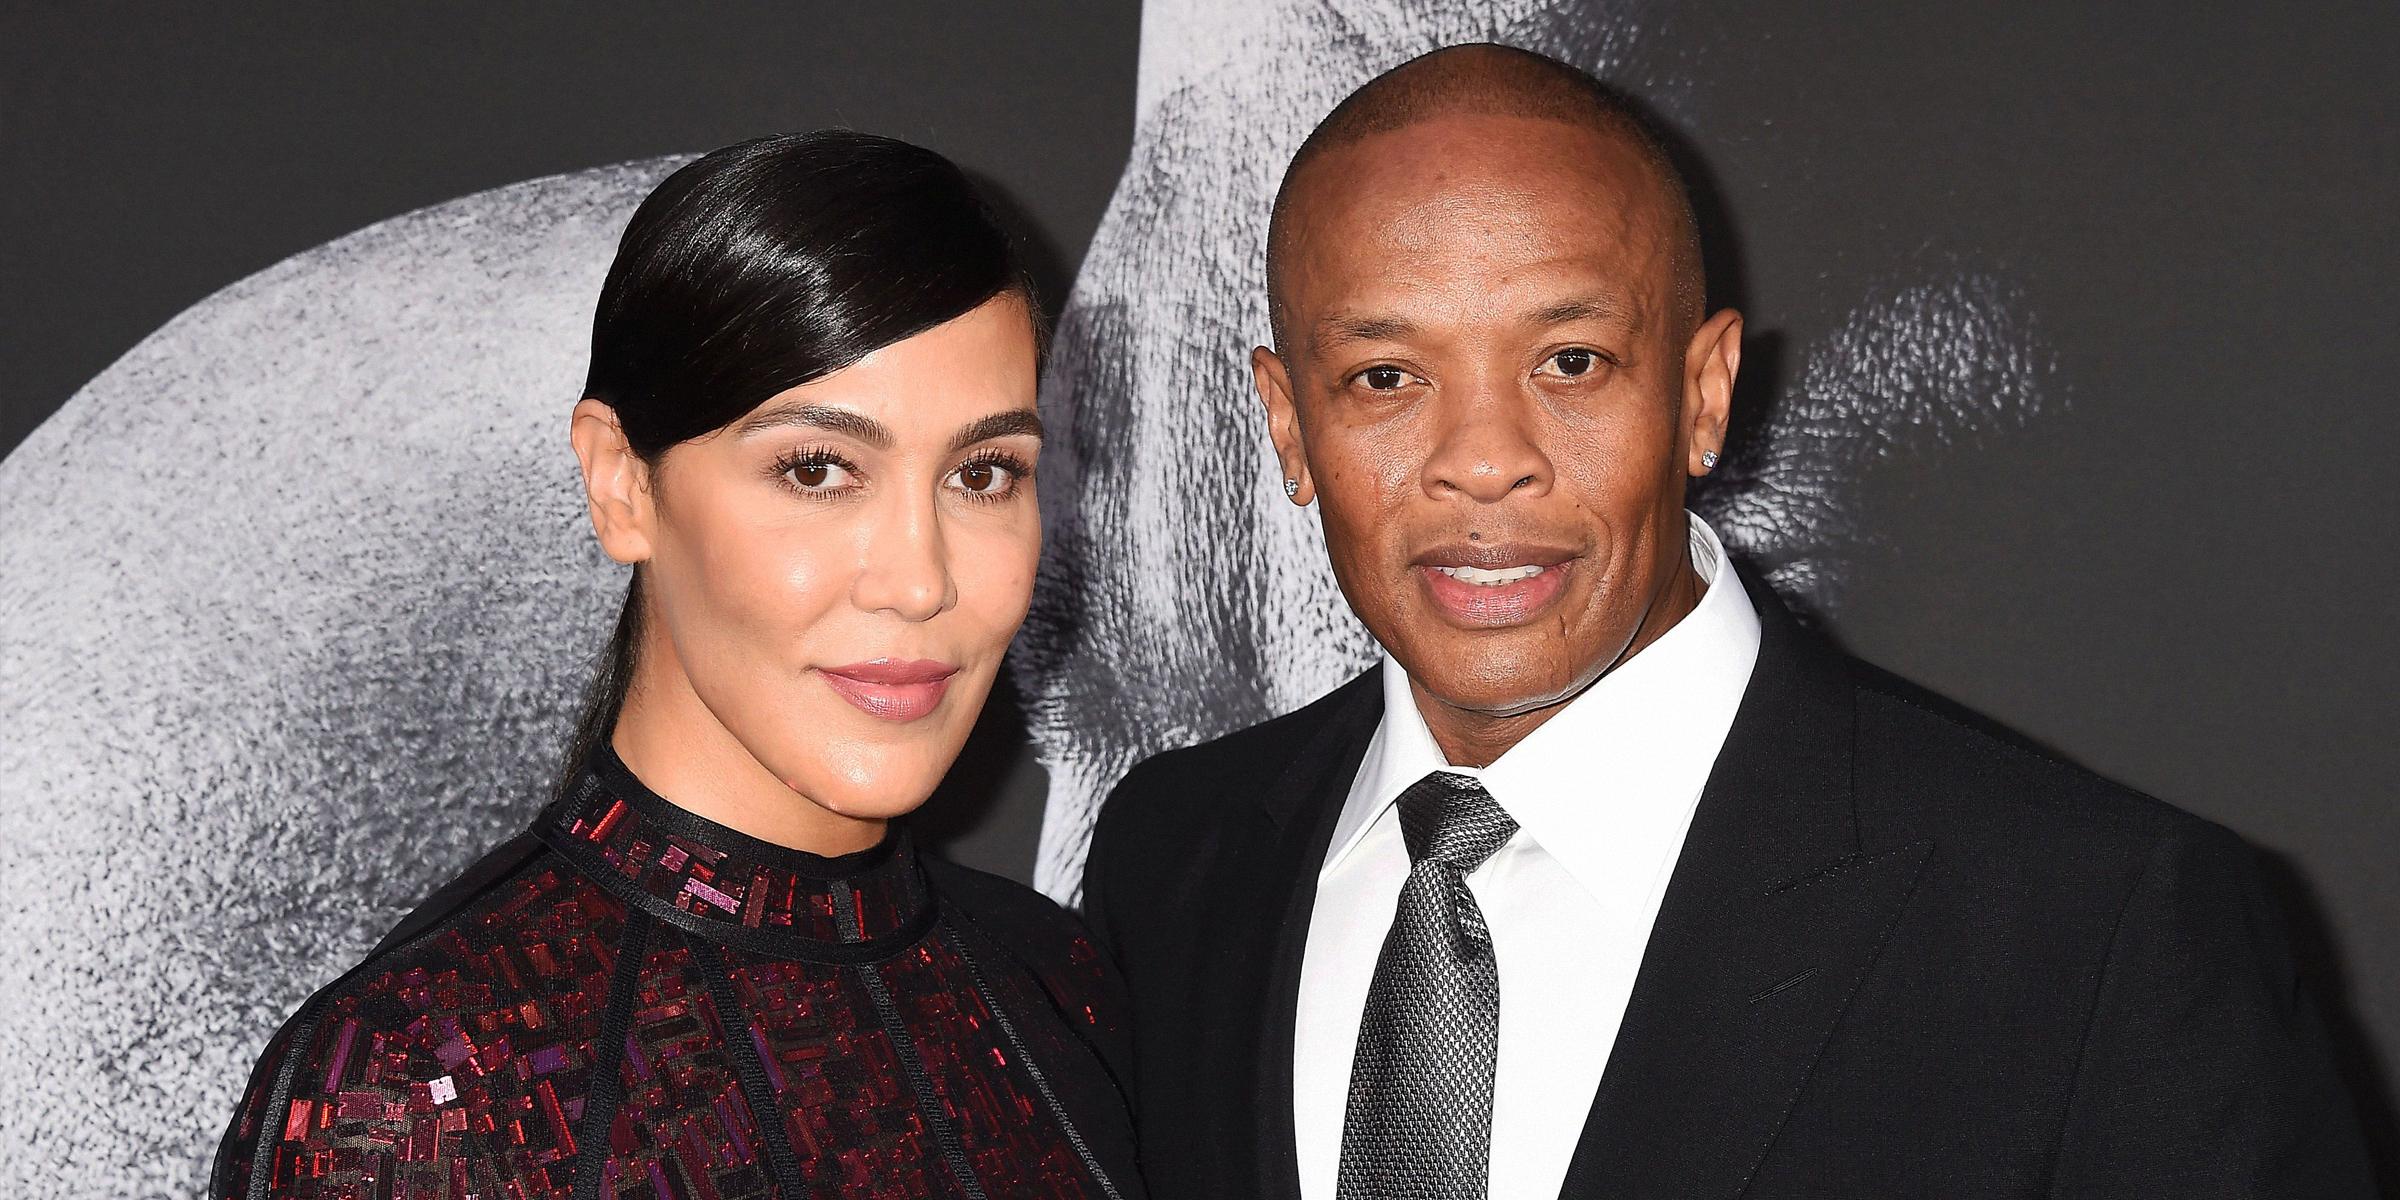 Nicole Threatt and Dr. Dre | Source: Getty Images